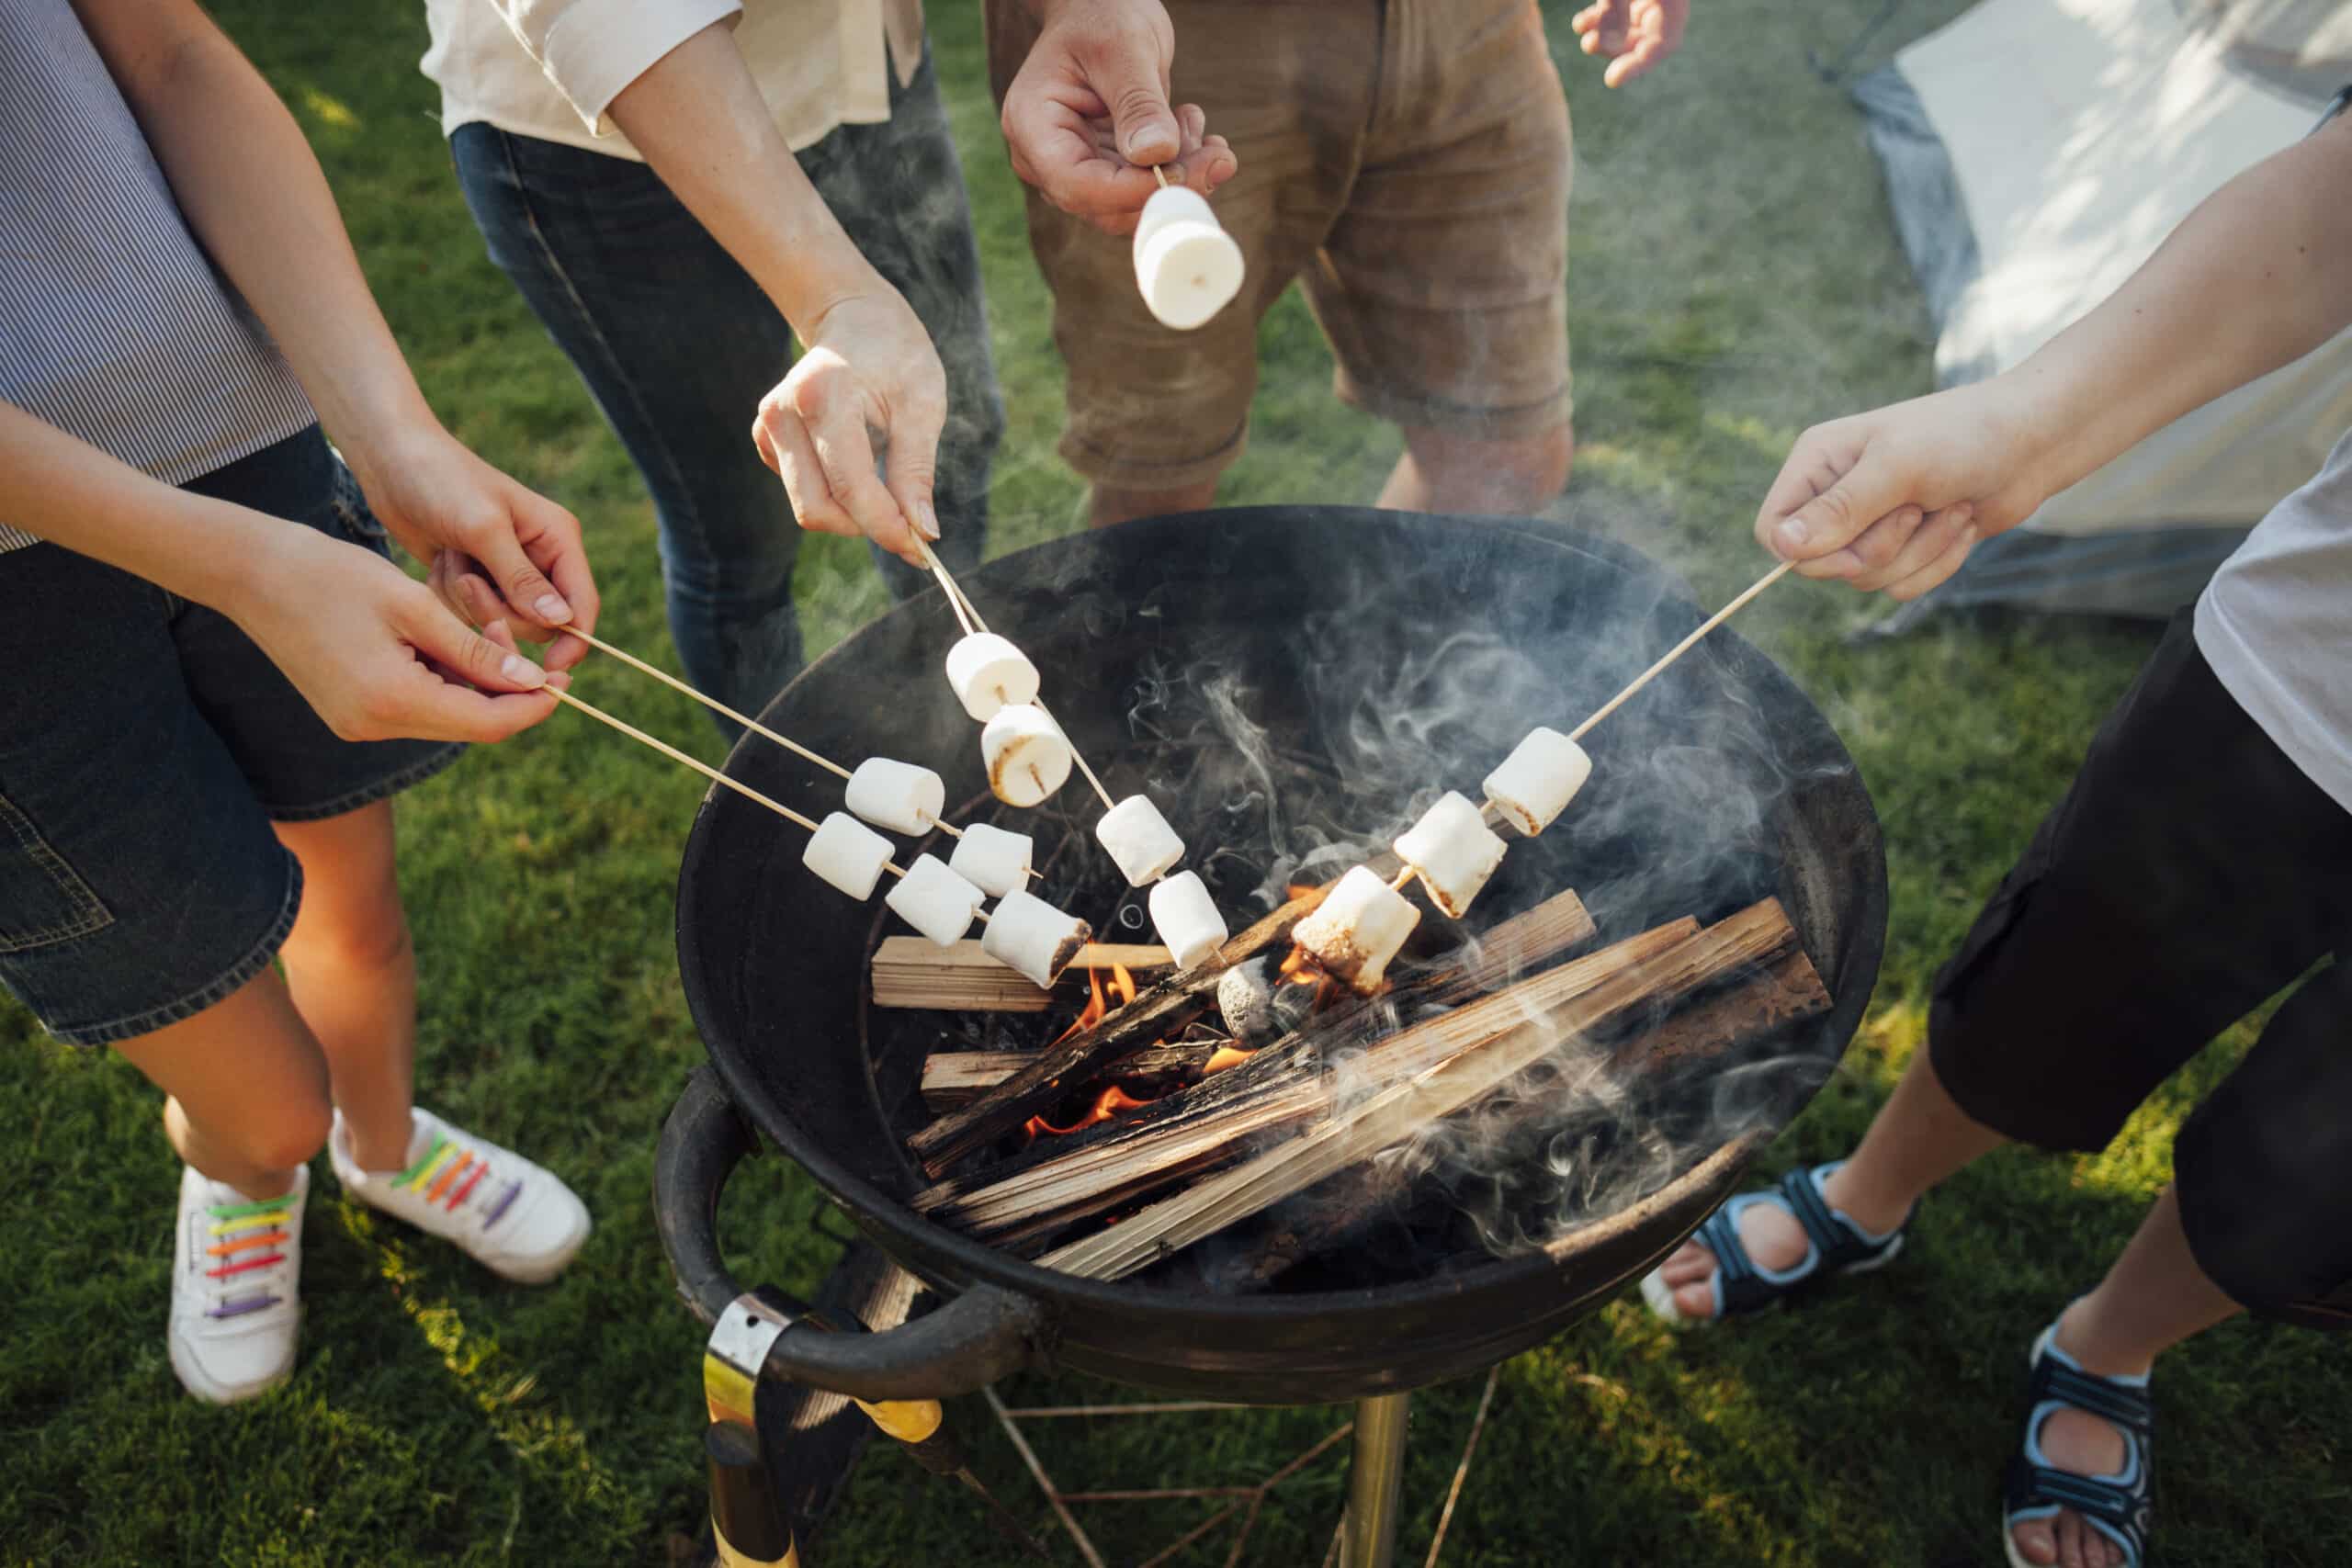 elevated-view-hands-roasting-marshmallow-barbecue-fire lightened using a grill lighter